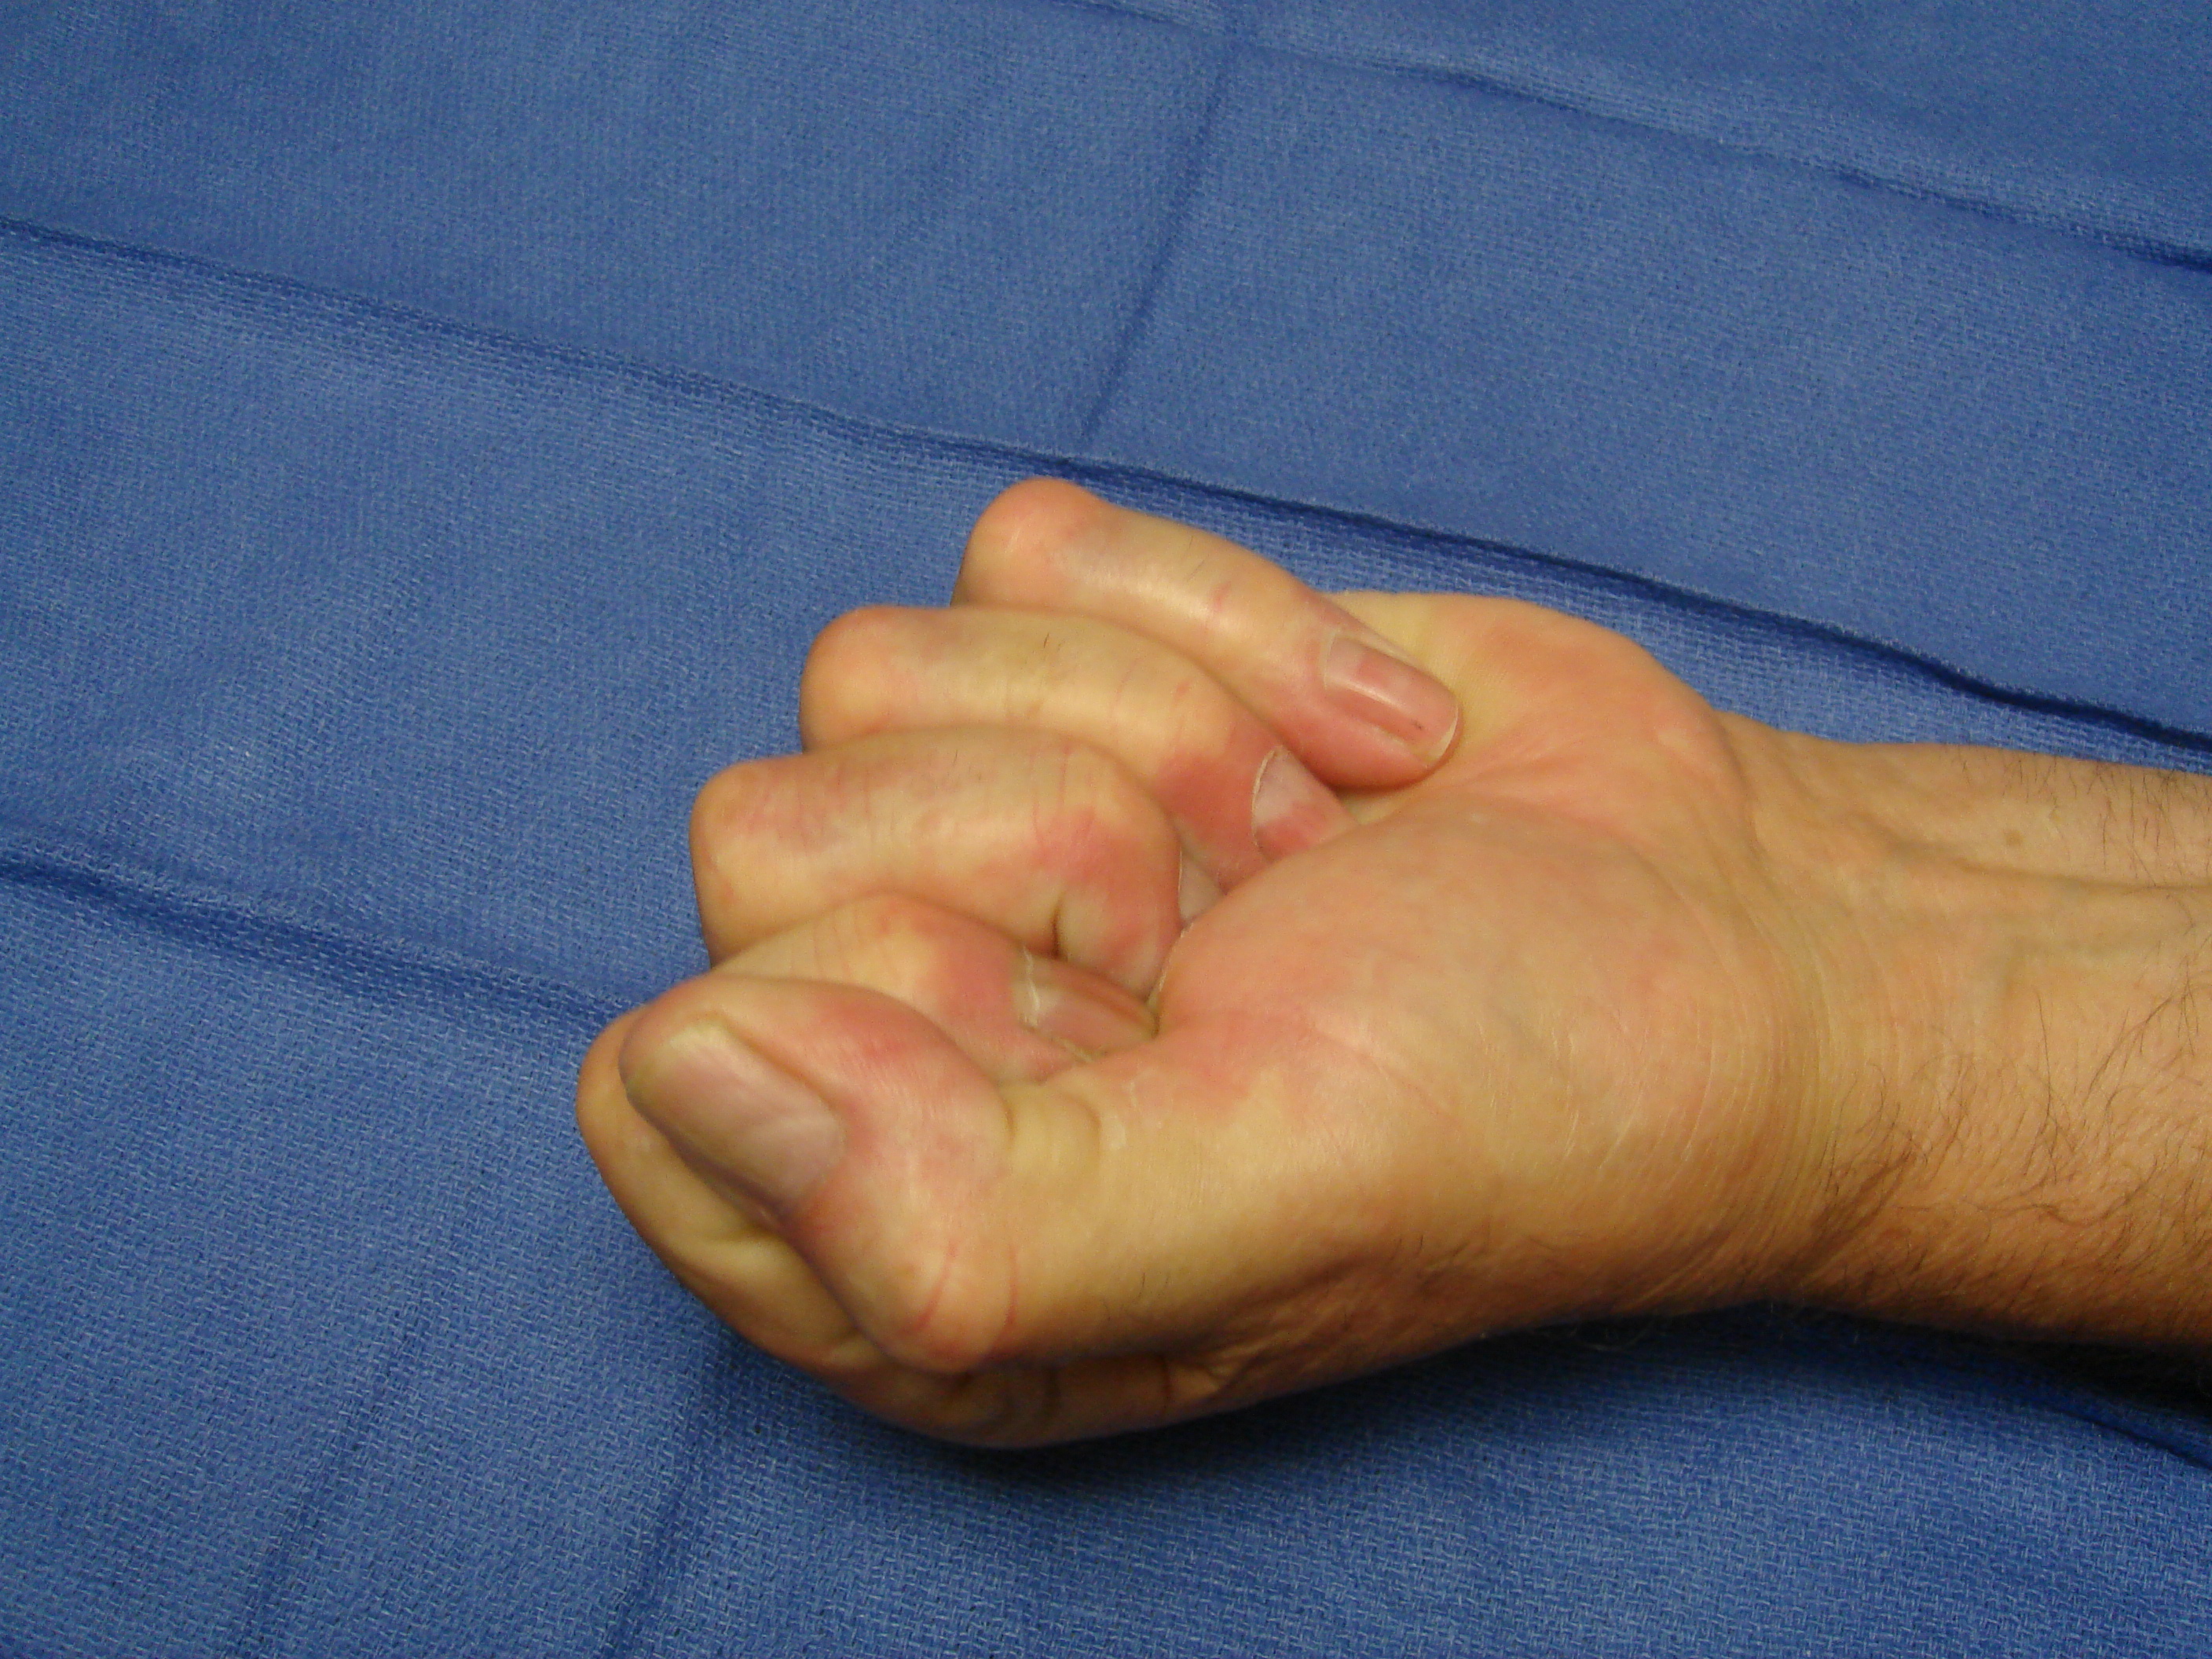 Figure 6c: This patient has advanced post-surgical recurrence of Dupuytren’s contracture affecting his left ring and little fingers. There is very limited active and passive ROM. The patient refused to have surgery again, despite dysfunction, but sought collagenase on the advice of a friend who was treated with CCH. Identifiable, palpable cords are present in addition to scar tissue; ultimately, more than 1 treatment cycle was going to be required; treatment started with the little finger.